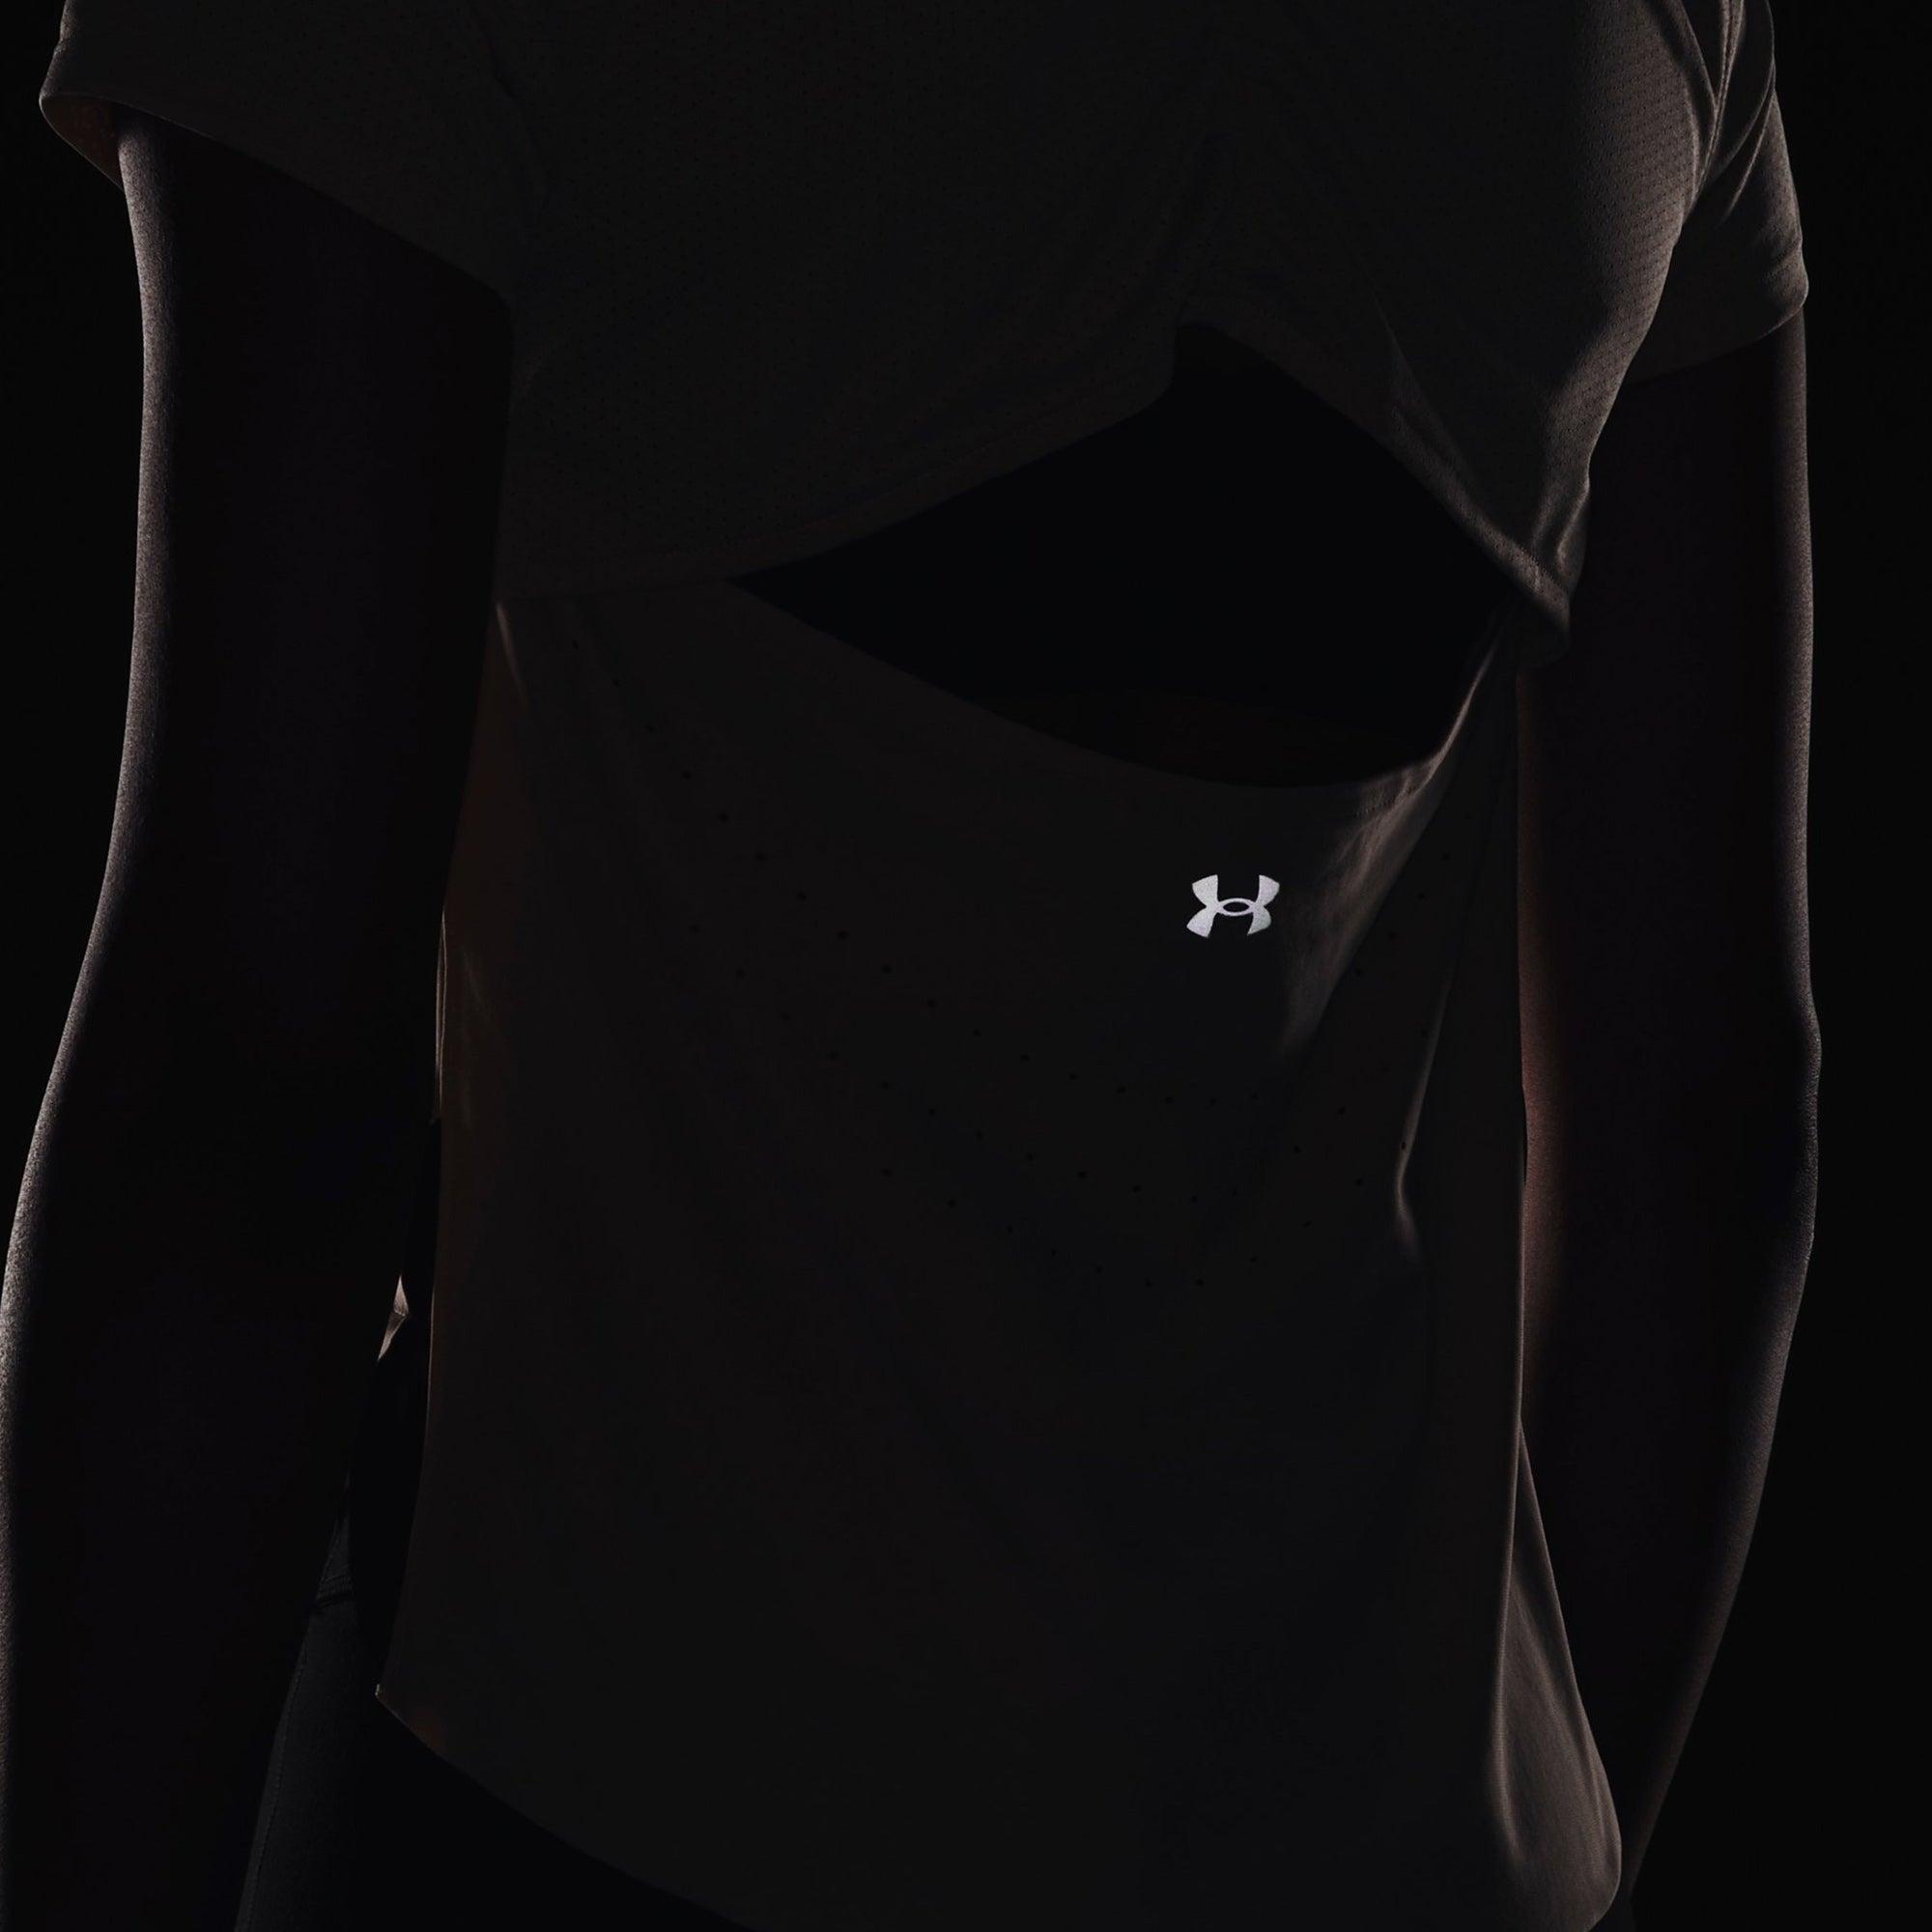 Áo tay ngắn thể thao nữ Under Armour Paceher - 1369800-676